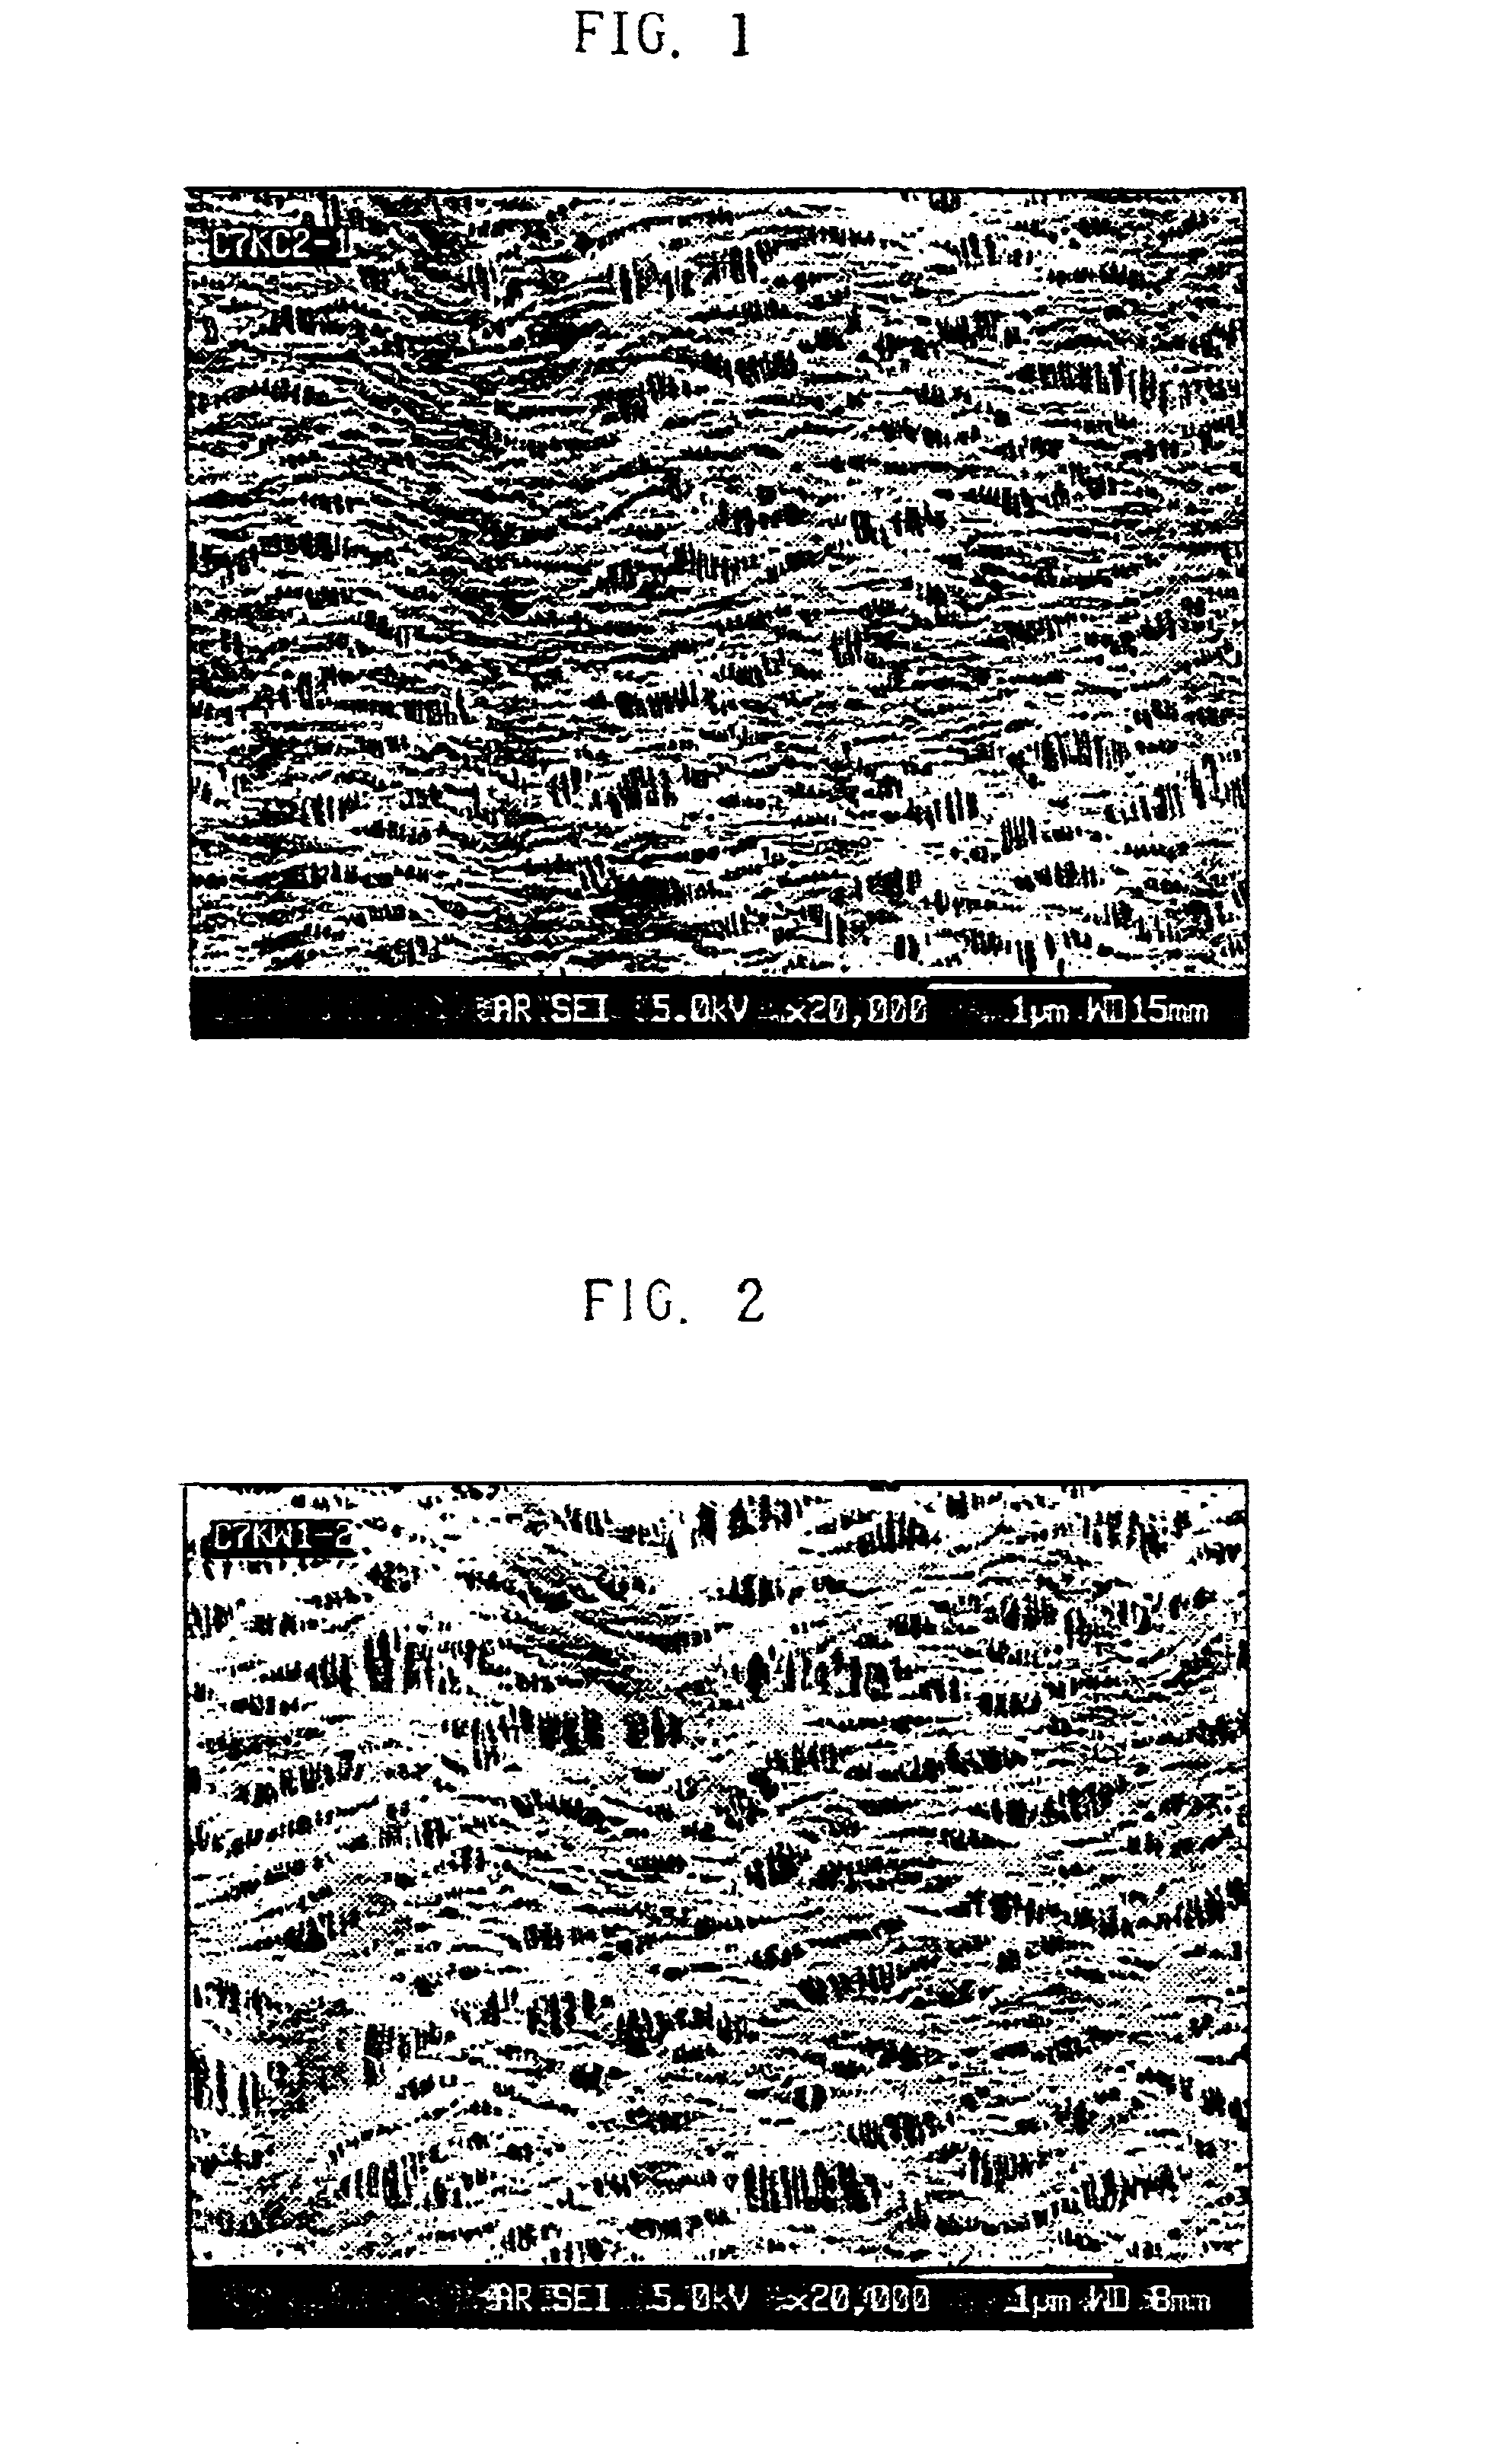 Methods for reforming polymer surface for improved wettability